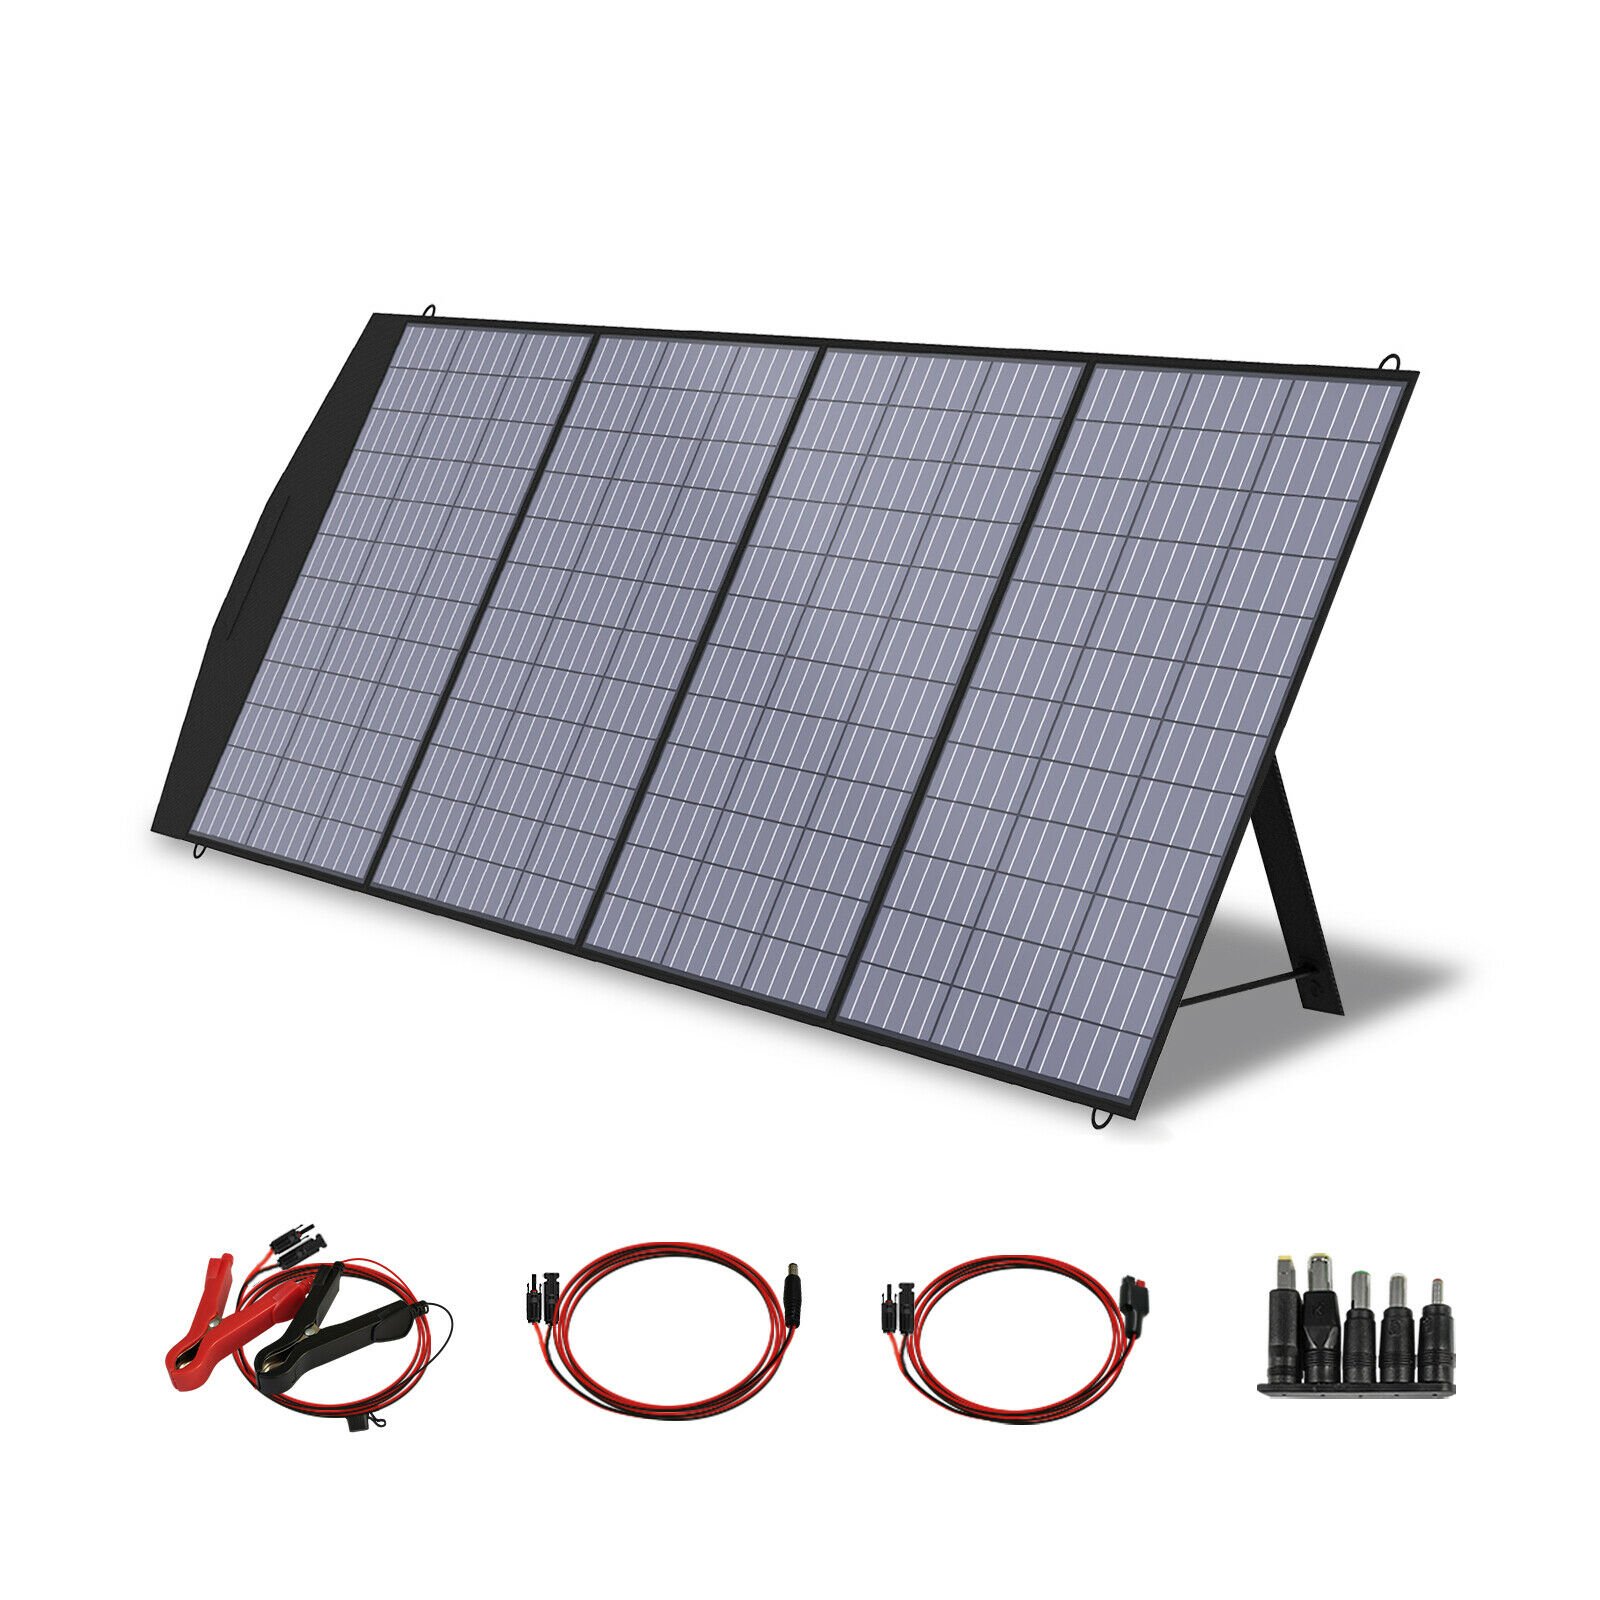 200W Portable Solar Panel Charger Foldable Solar Panel Kit for Generator Camping